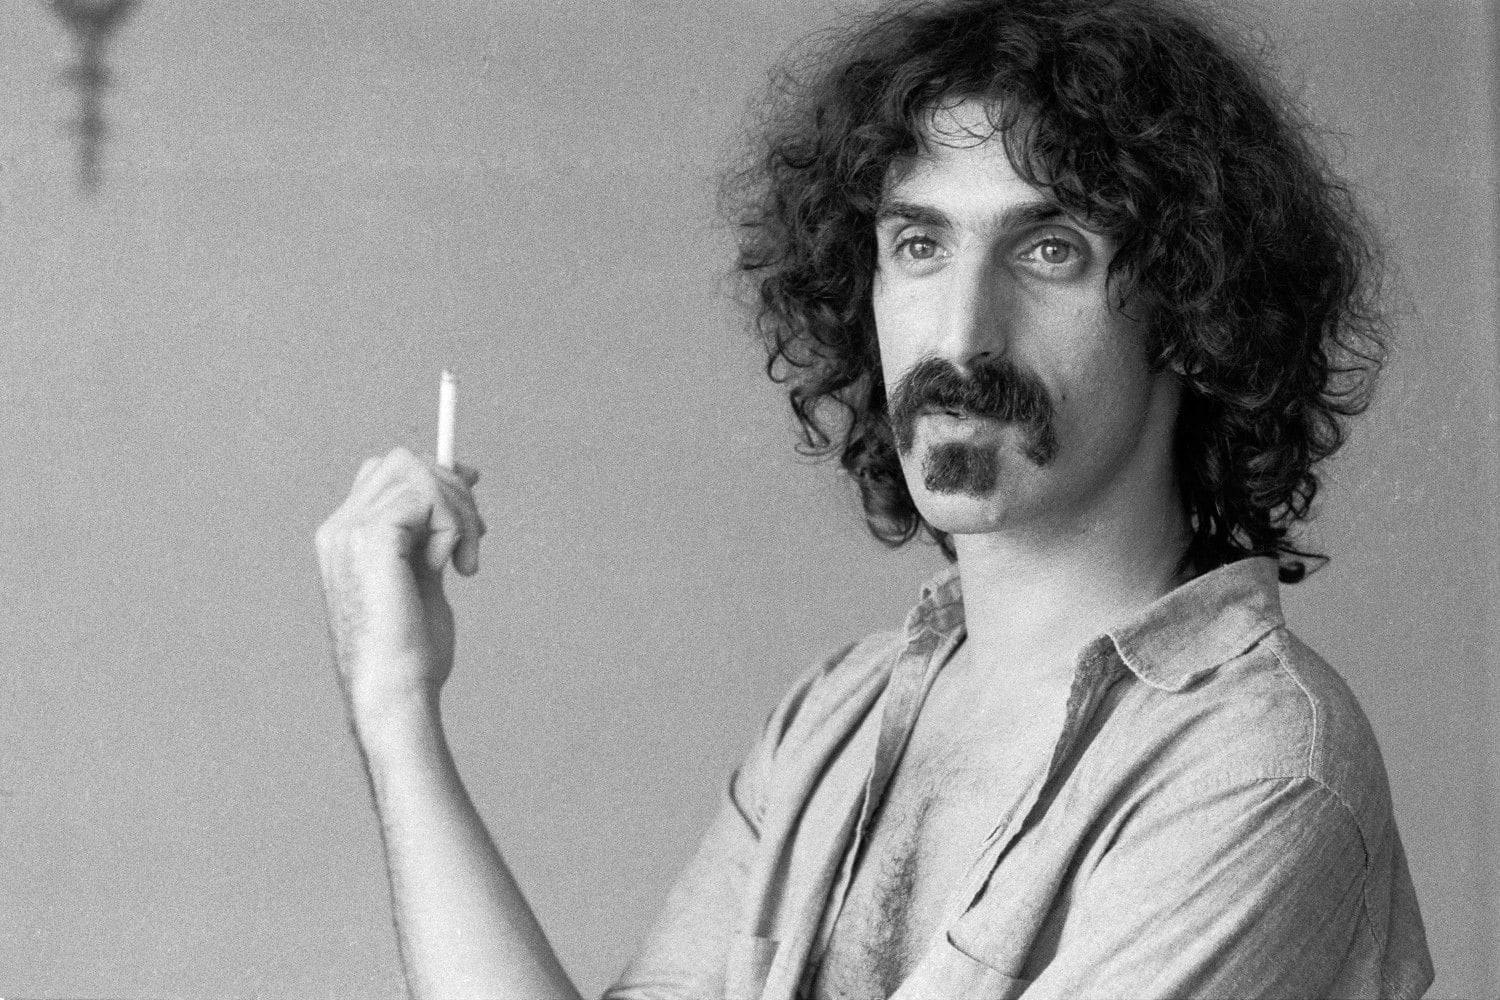 Frank Zappa - The Man Behind The Mask (& Gloves)